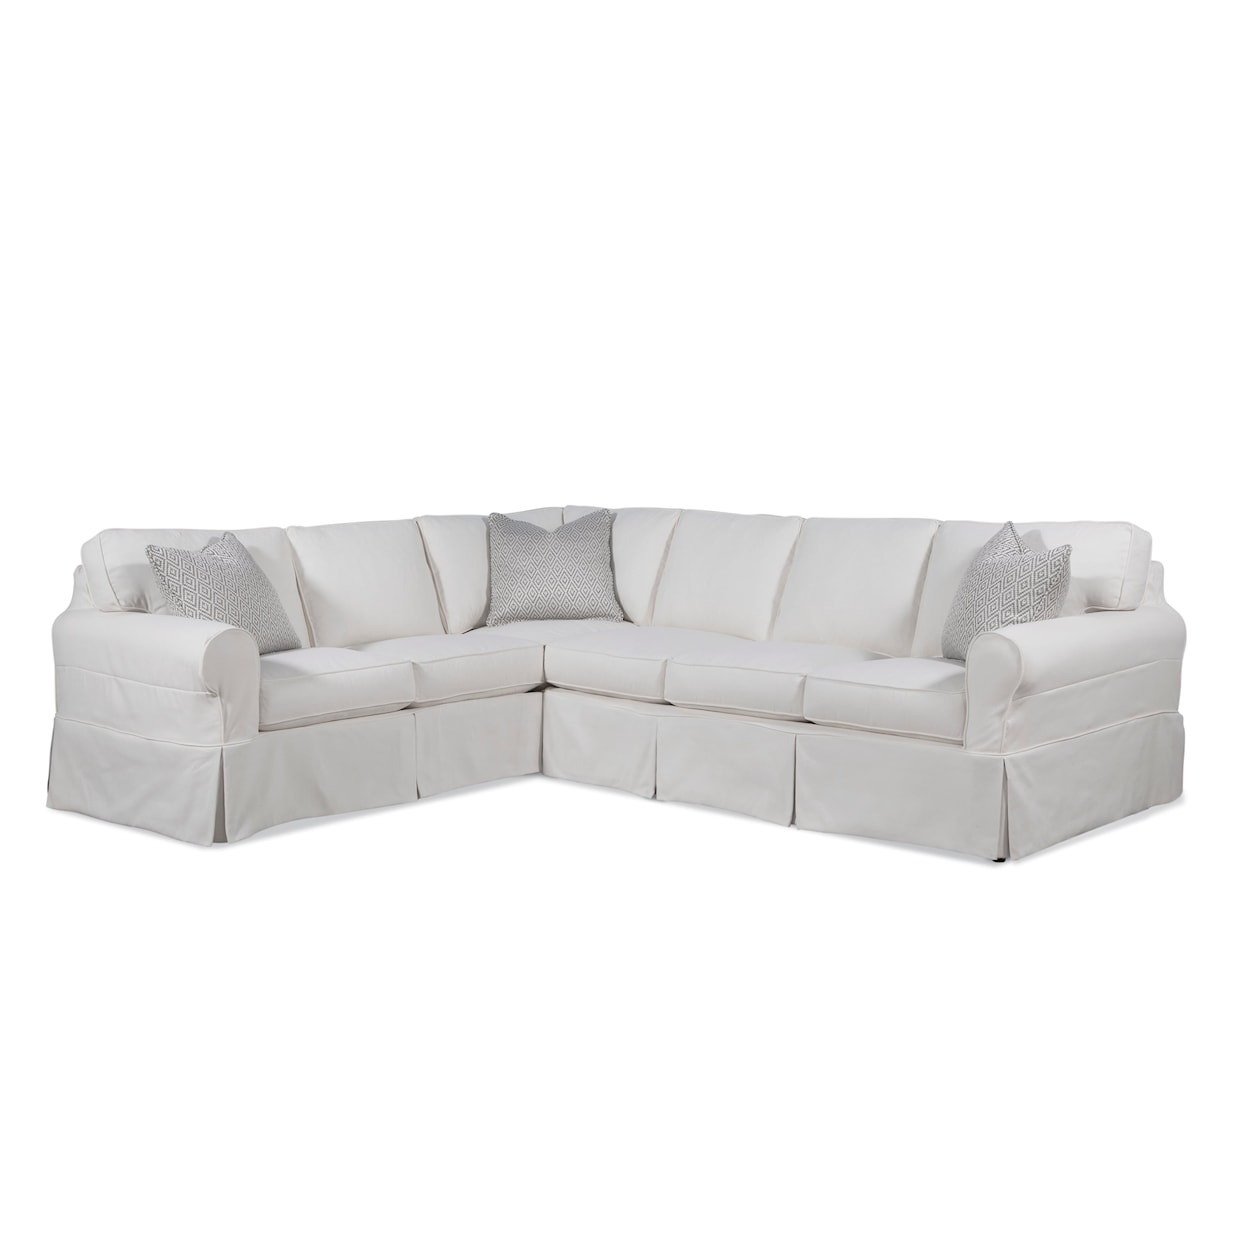 Braxton Culler Bedford Sectional Sofa with Slipcover